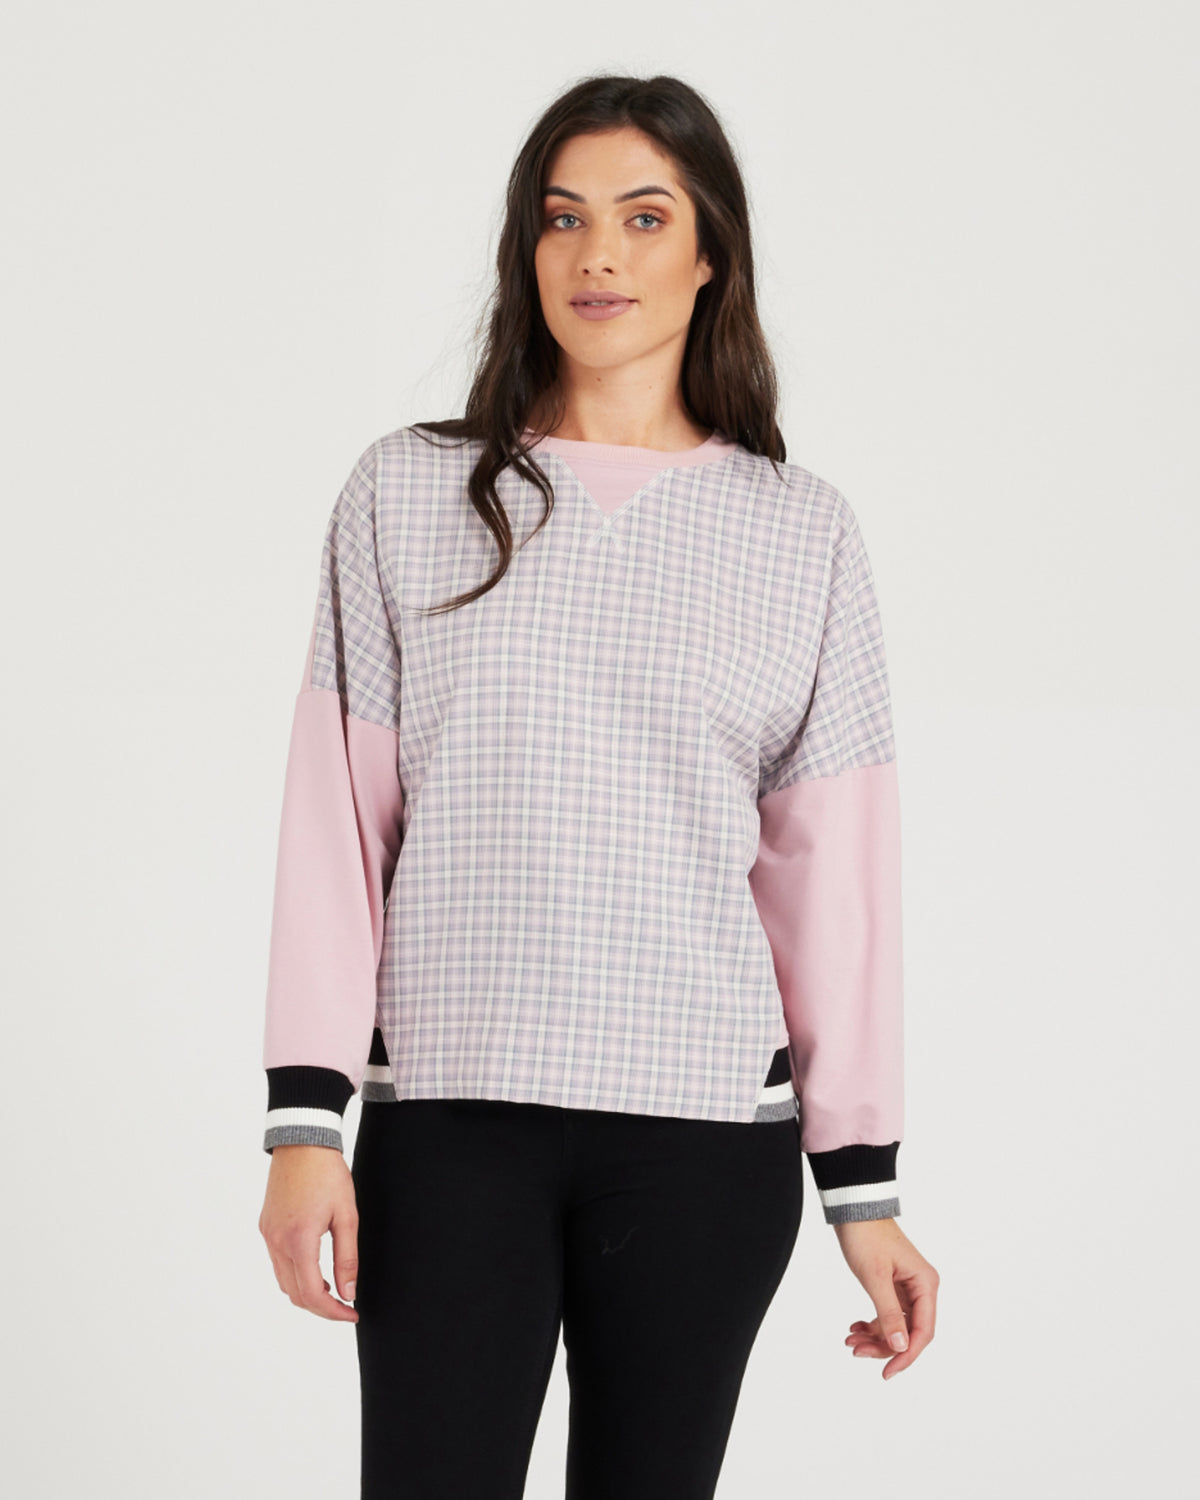 Seduce Relaxed Top - Grey / Pink